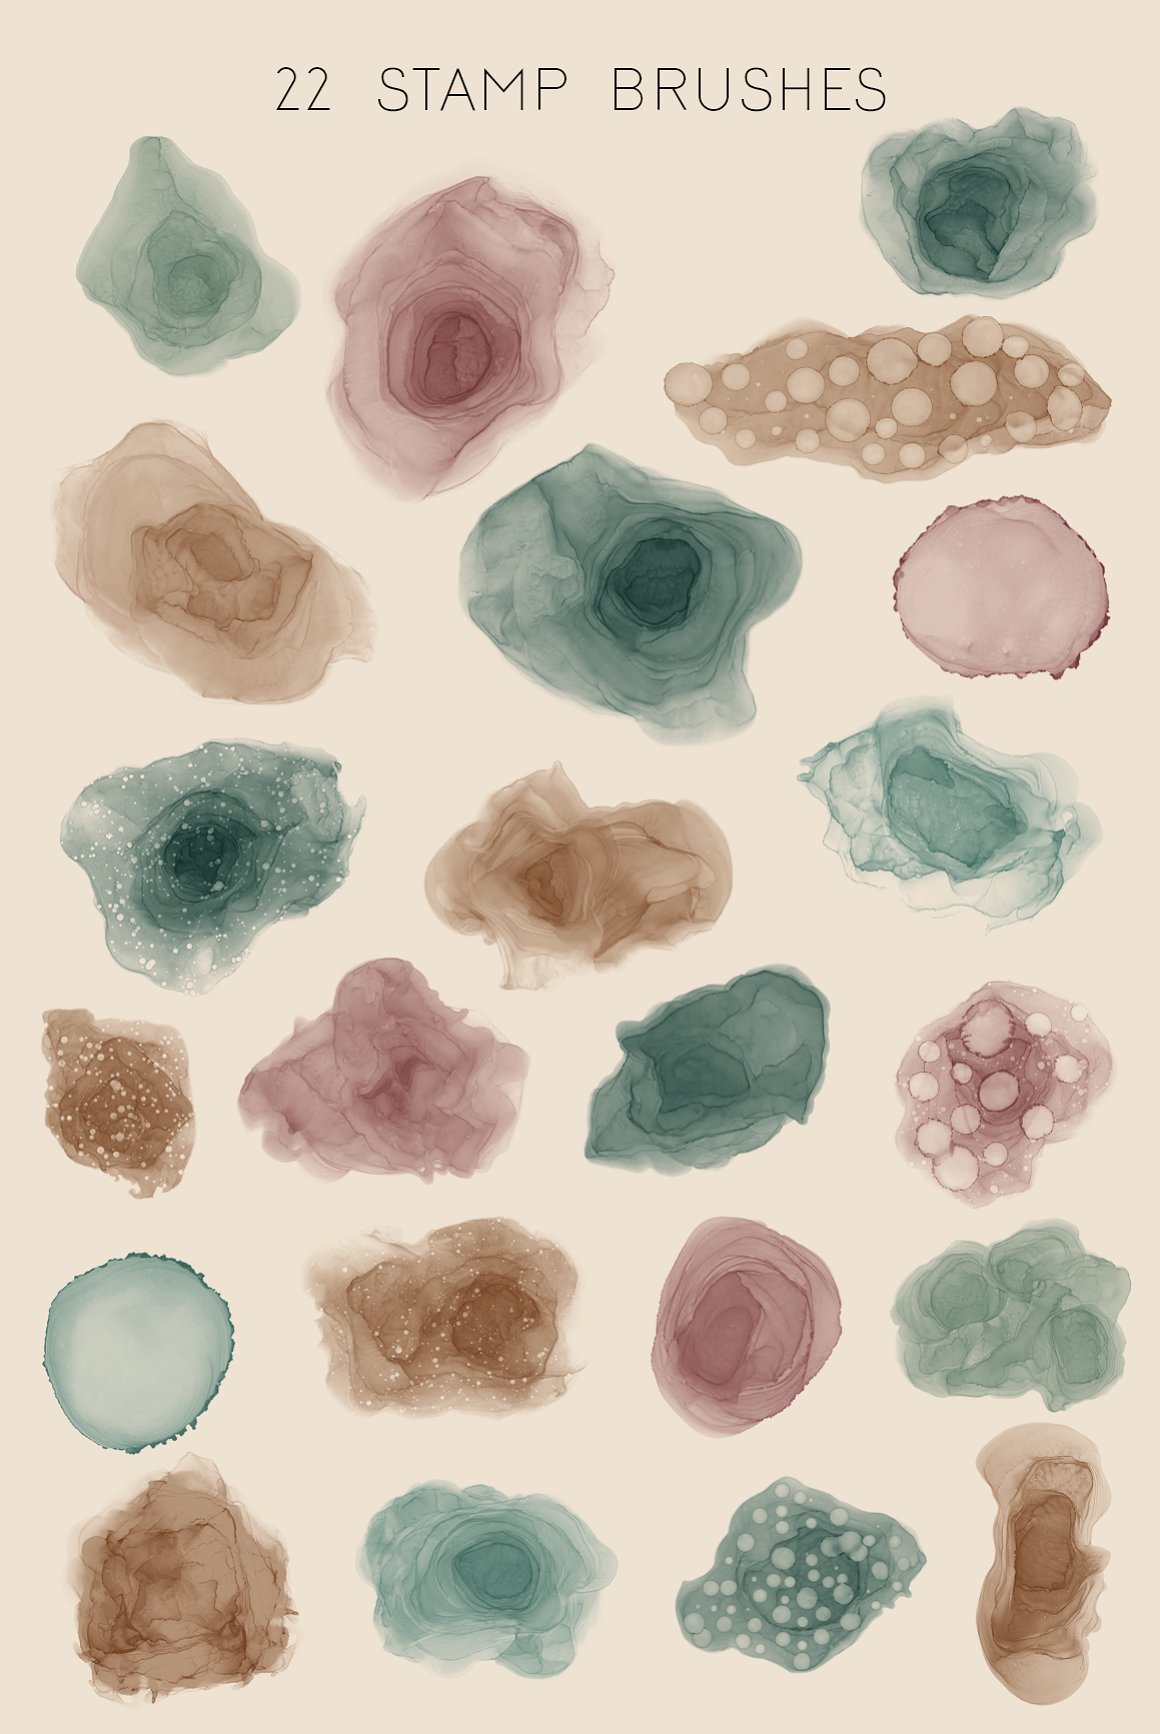 A set of 22 different pink, brown and green stamp brushes on a beige background.